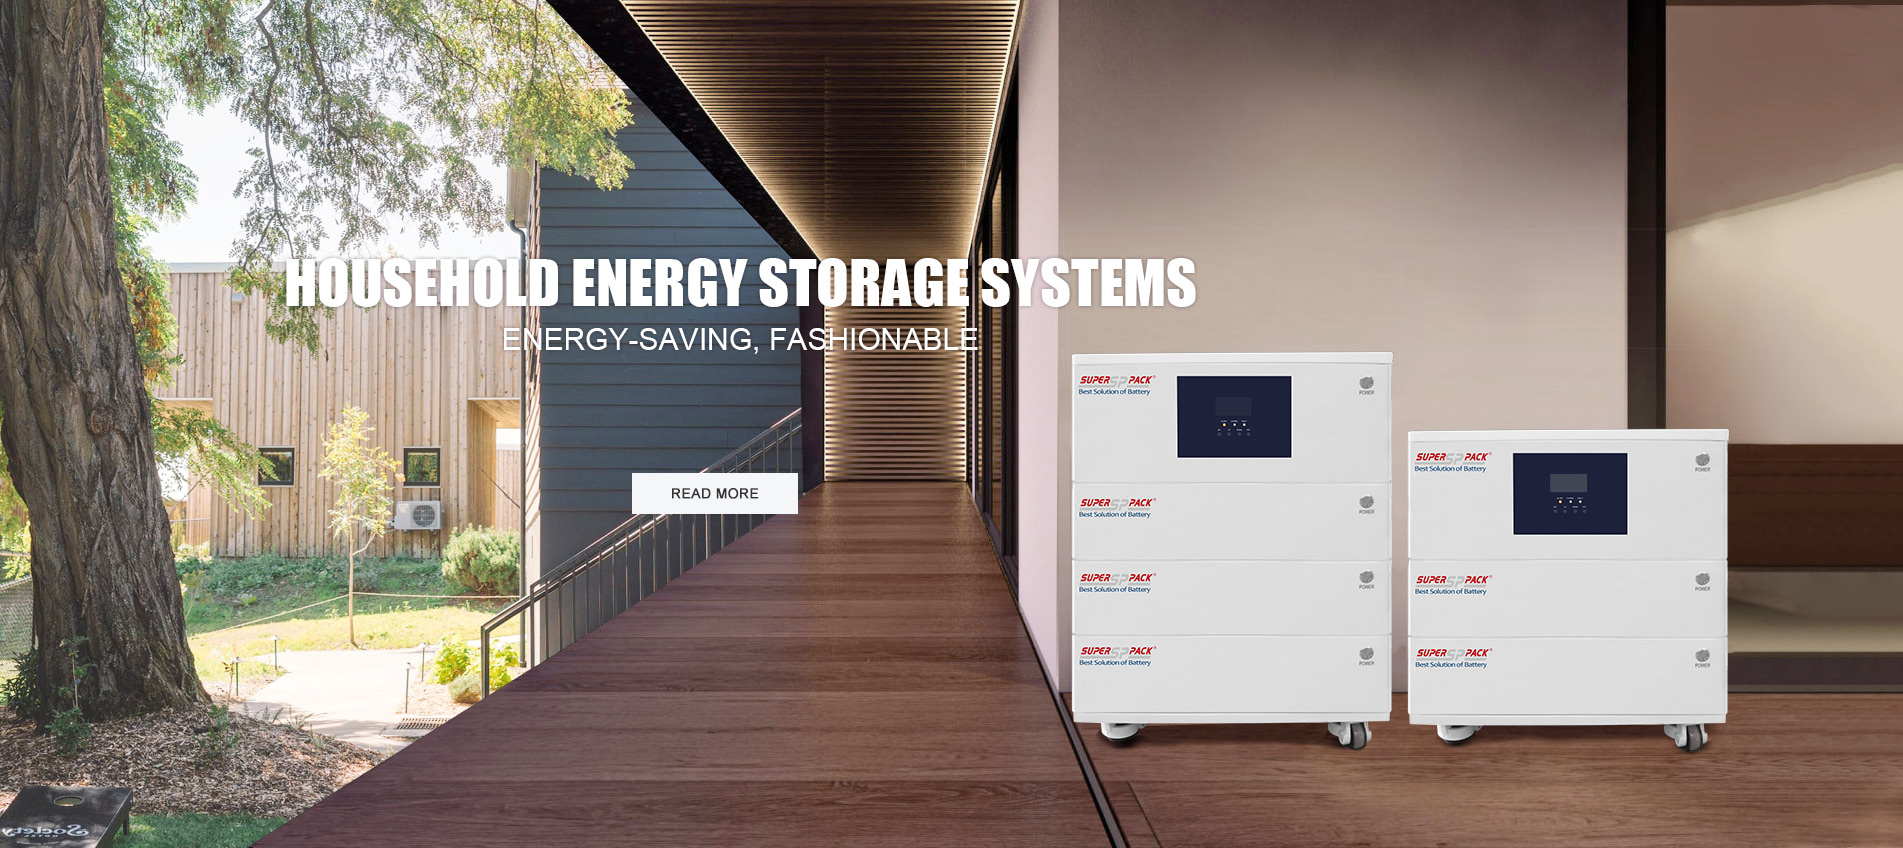 Household energy storage systems